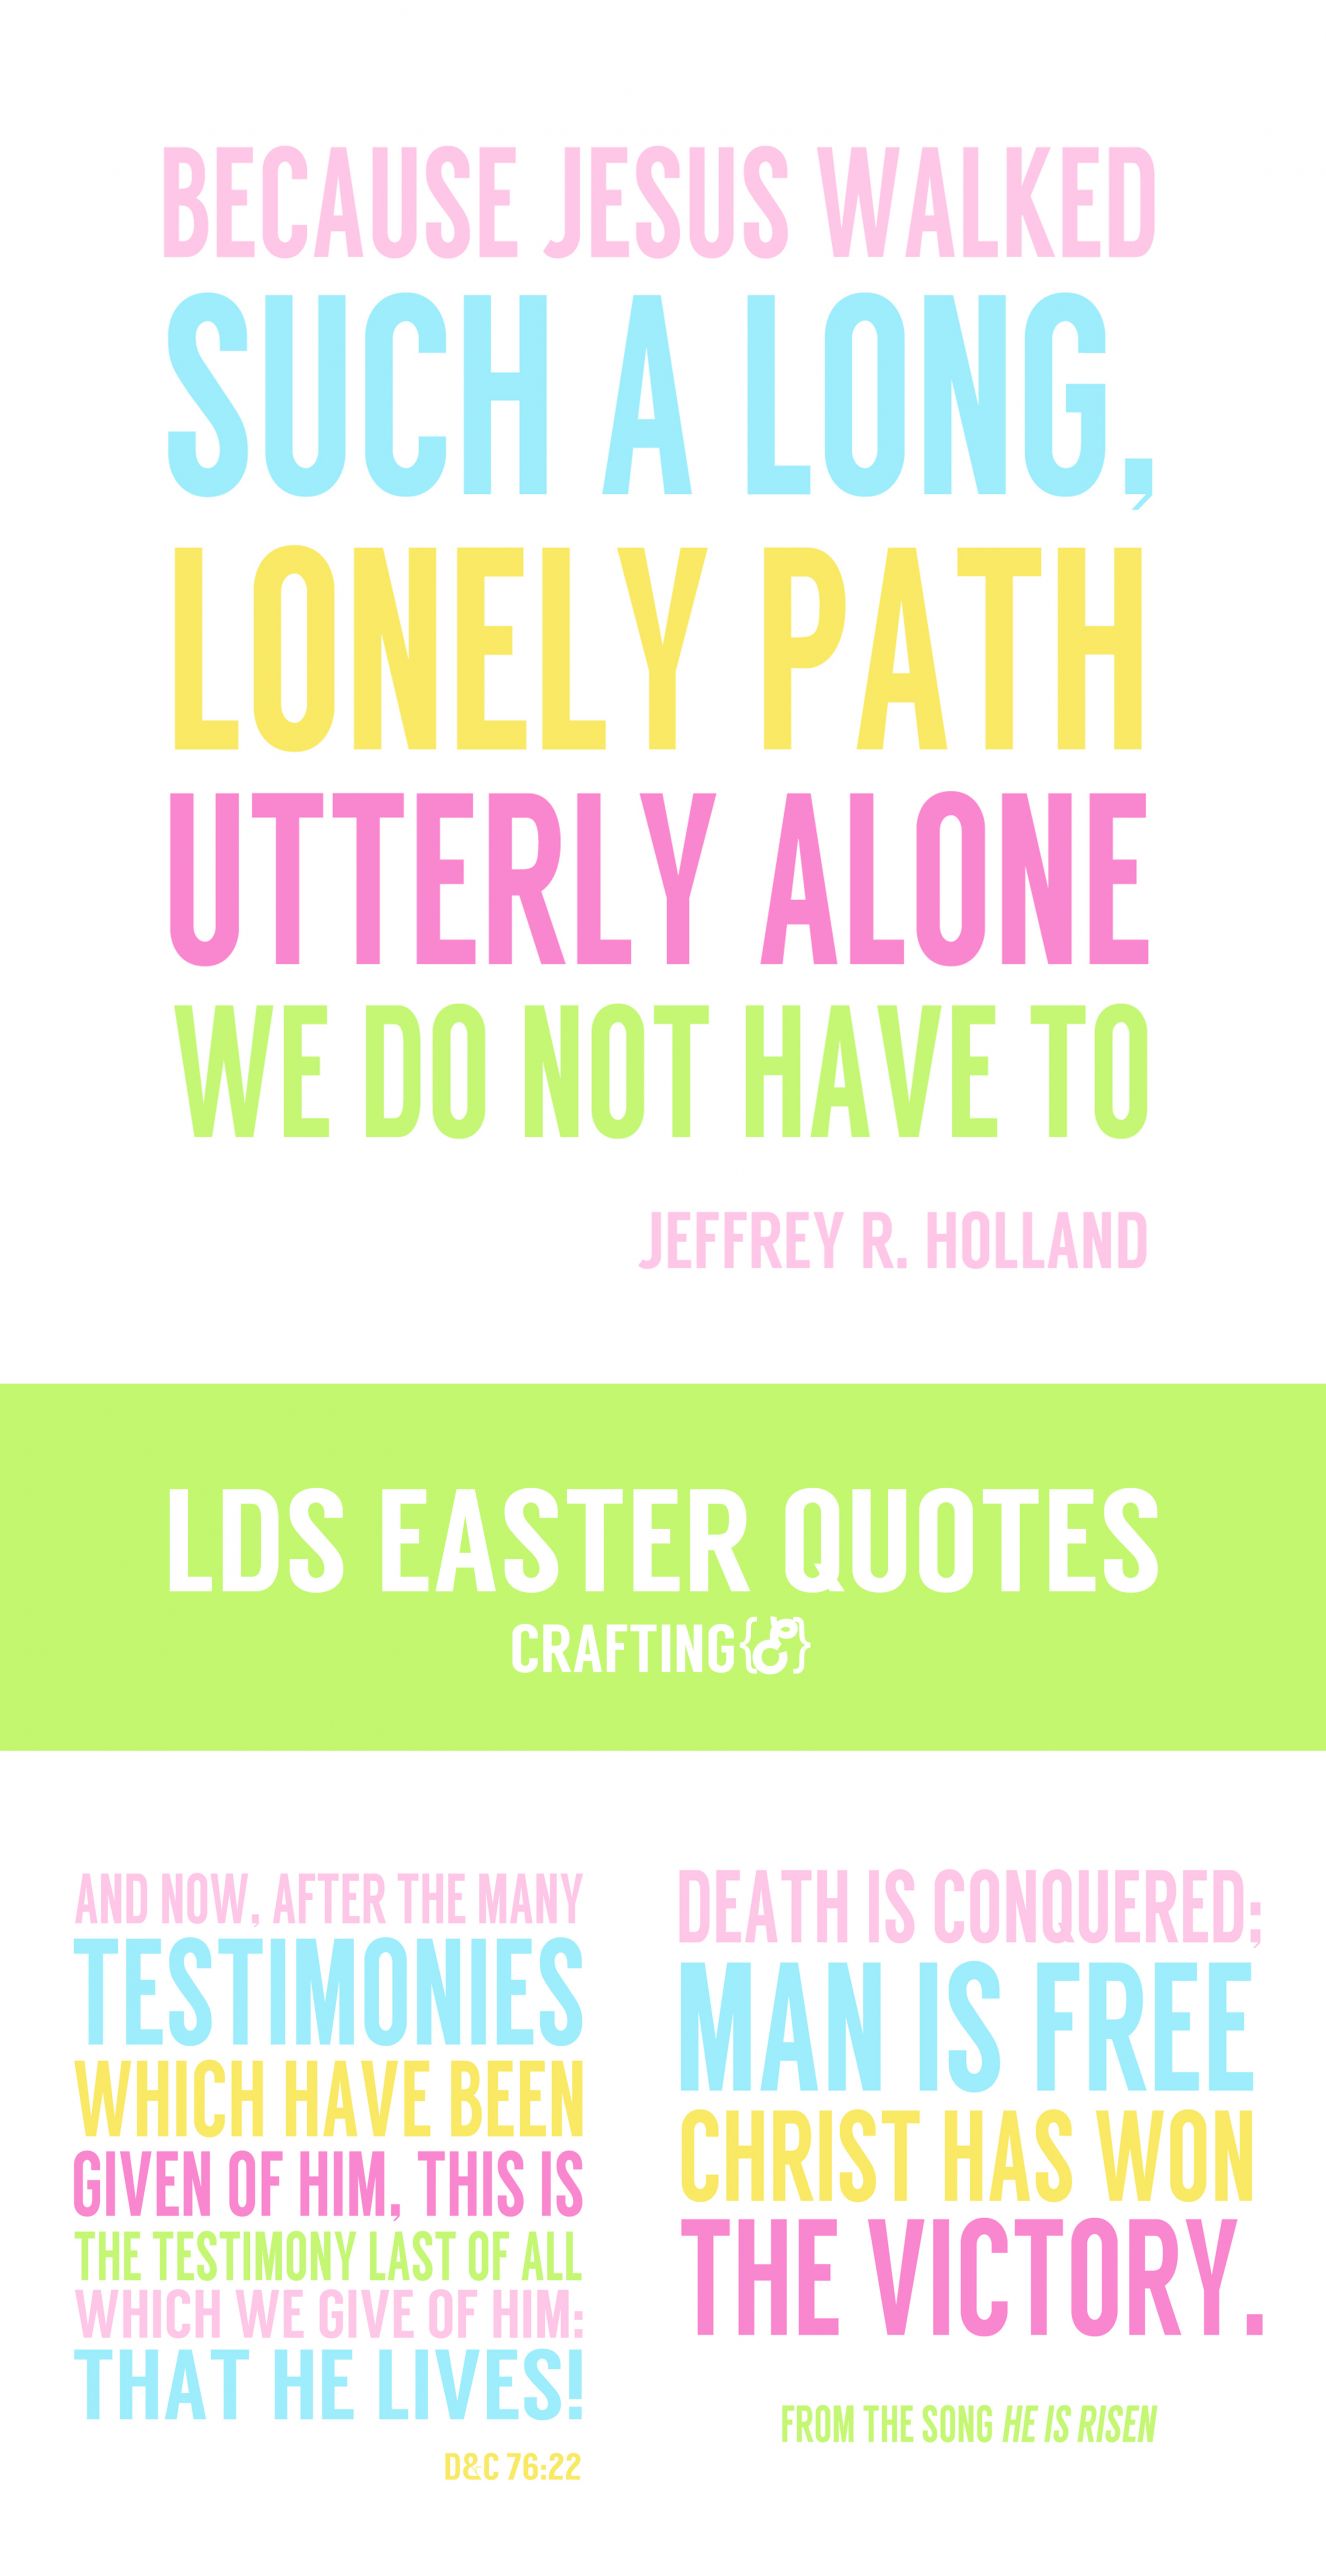 Lds Easter Quotes
 LDS Easter Quotes Craftinge E